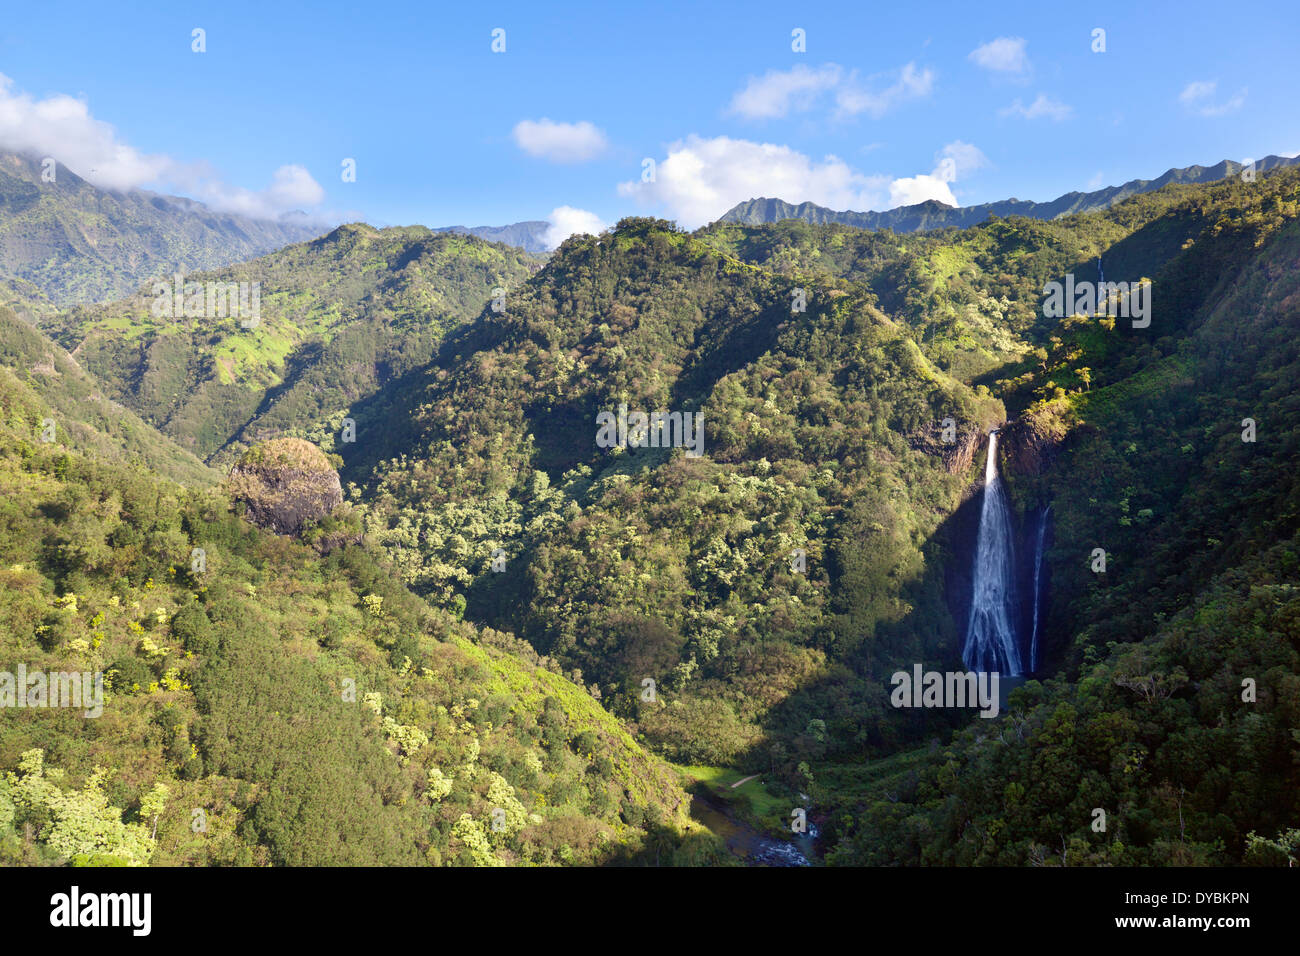 Stunning green rainforest landscape in the center of Kauai, Hawaii. Aerial shot from helicopter. Stock Photo